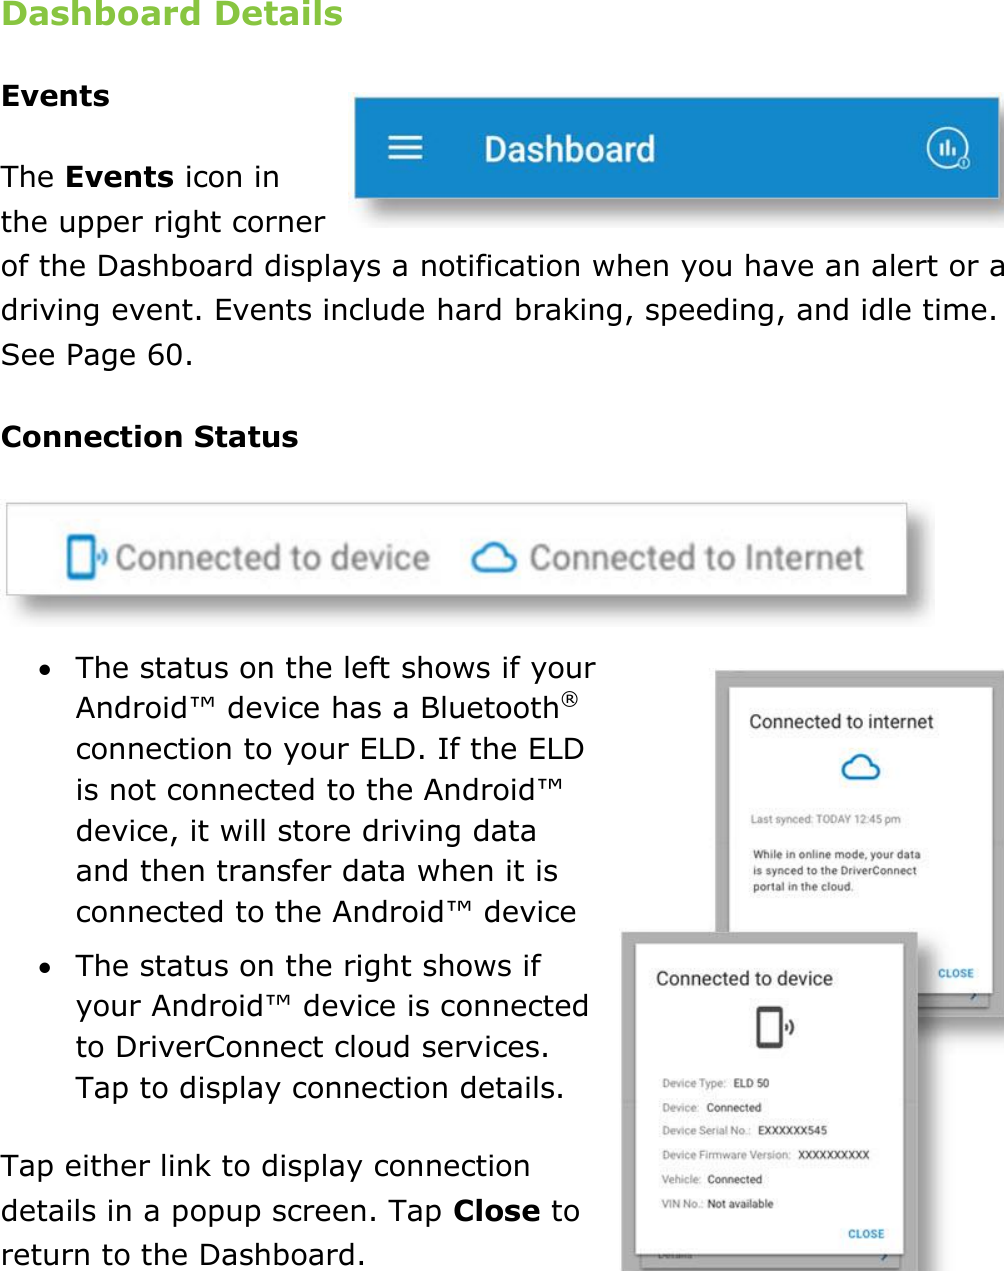 Set My Duty Status DriverConnect User Guide  21 © 2016-2017, Rand McNally, Inc. Dashboard Details Events The Events icon in the upper right corner of the Dashboard displays a notification when you have an alert or a driving event. Events include hard braking, speeding, and idle time. See Page 60. Connection Status   The status on the left shows if your Android™ device has a Bluetooth® connection to your ELD. If the ELD is not connected to the Android™ device, it will store driving data and then transfer data when it is connected to the Android™ device  The status on the right shows if your Android™ device is connected to DriverConnect cloud services. Tap to display connection details. Tap either link to display connection details in a popup screen. Tap Close to return to the Dashboard.   